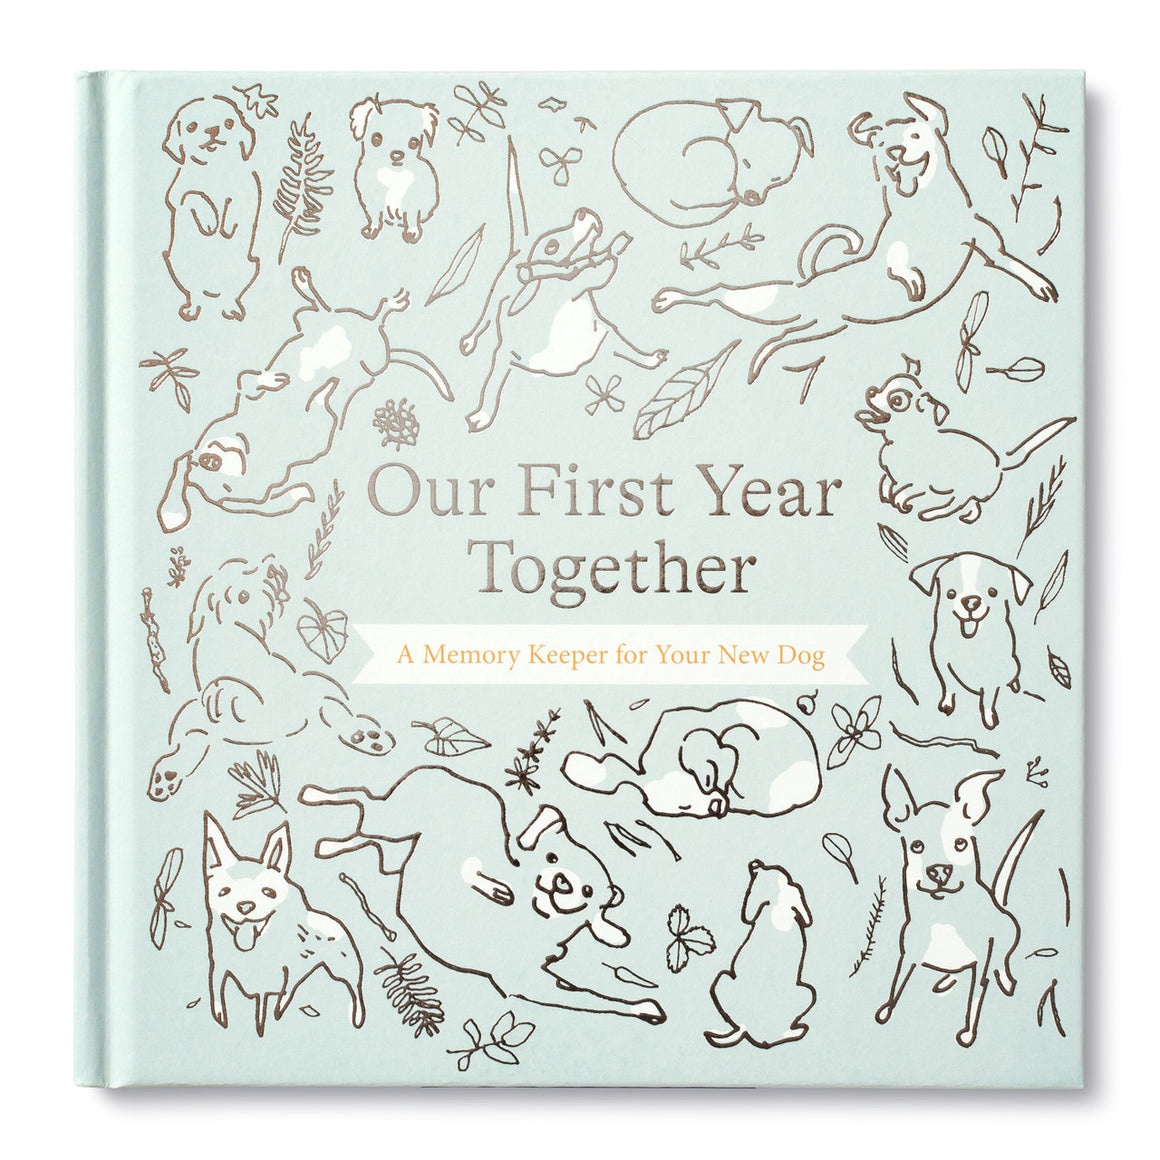 DOG KEEPSAKE: OUR FIRST YEAR TOGETHER